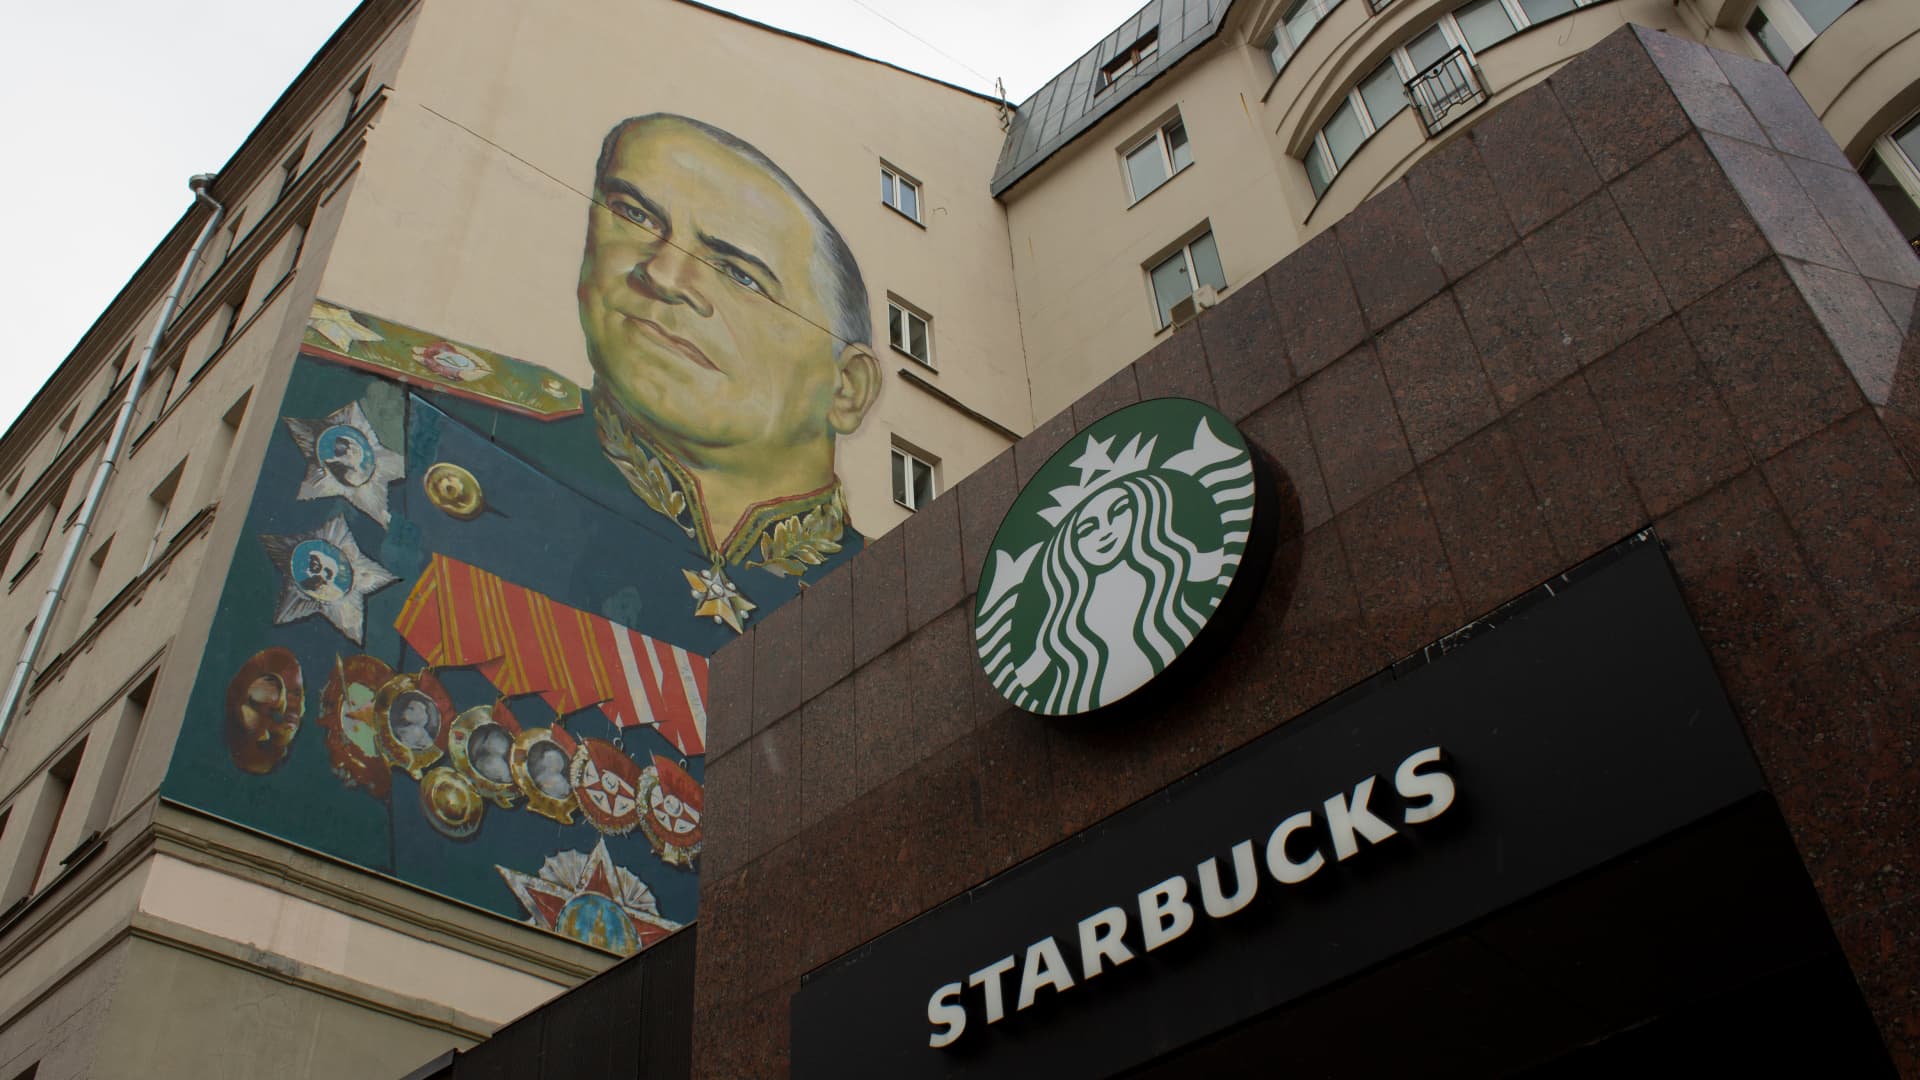 MOSCOW, RUSSIA - 2022/03/27: A Starbucks sign is seen alongside the mural of Georgy Zhukov, a Soviet general and Marshal of the Soviet Union who oversaw some of the USSRâs most decisive victories over Nazi Germany during WWII. (Photo by Vlad Karkov/SOPA Images/LightRocket via Getty Images)